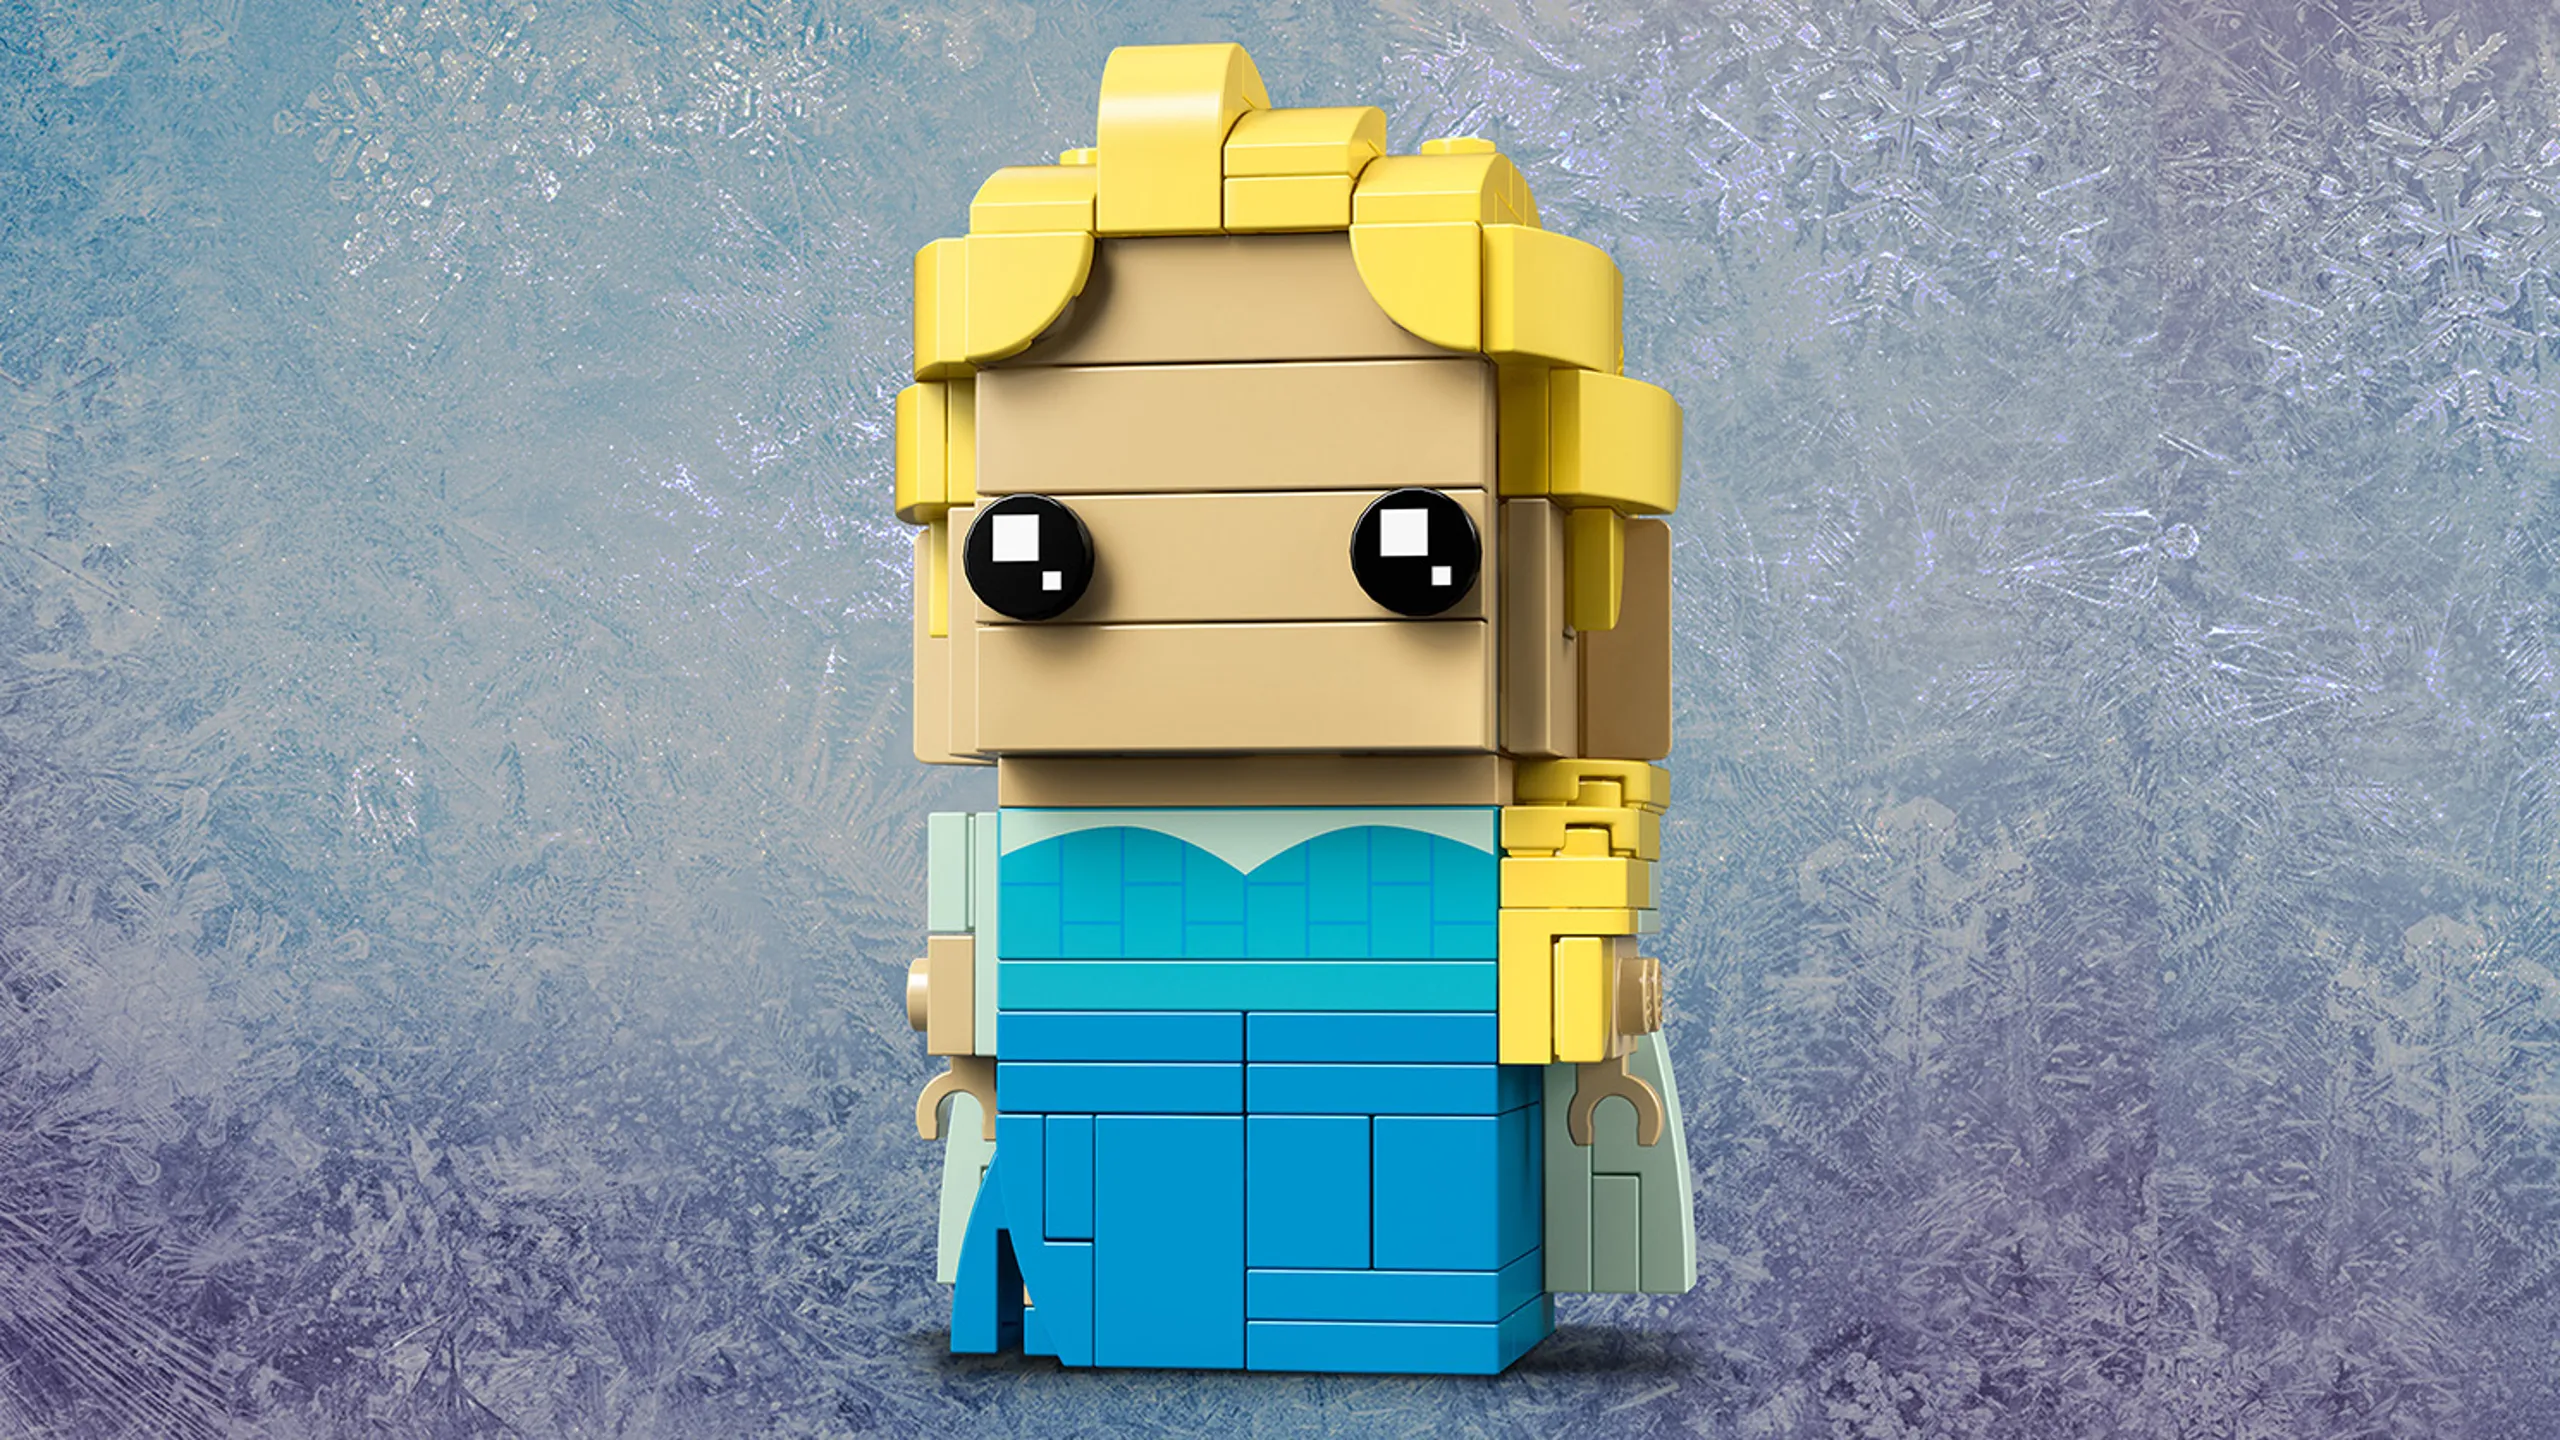 LEGO Brickheadz - 41617 Elsa - Build a LEGO Brickheadz version of Elsa from Disney movie Frozen with her iconic blonde braid and display her on a baseplate.